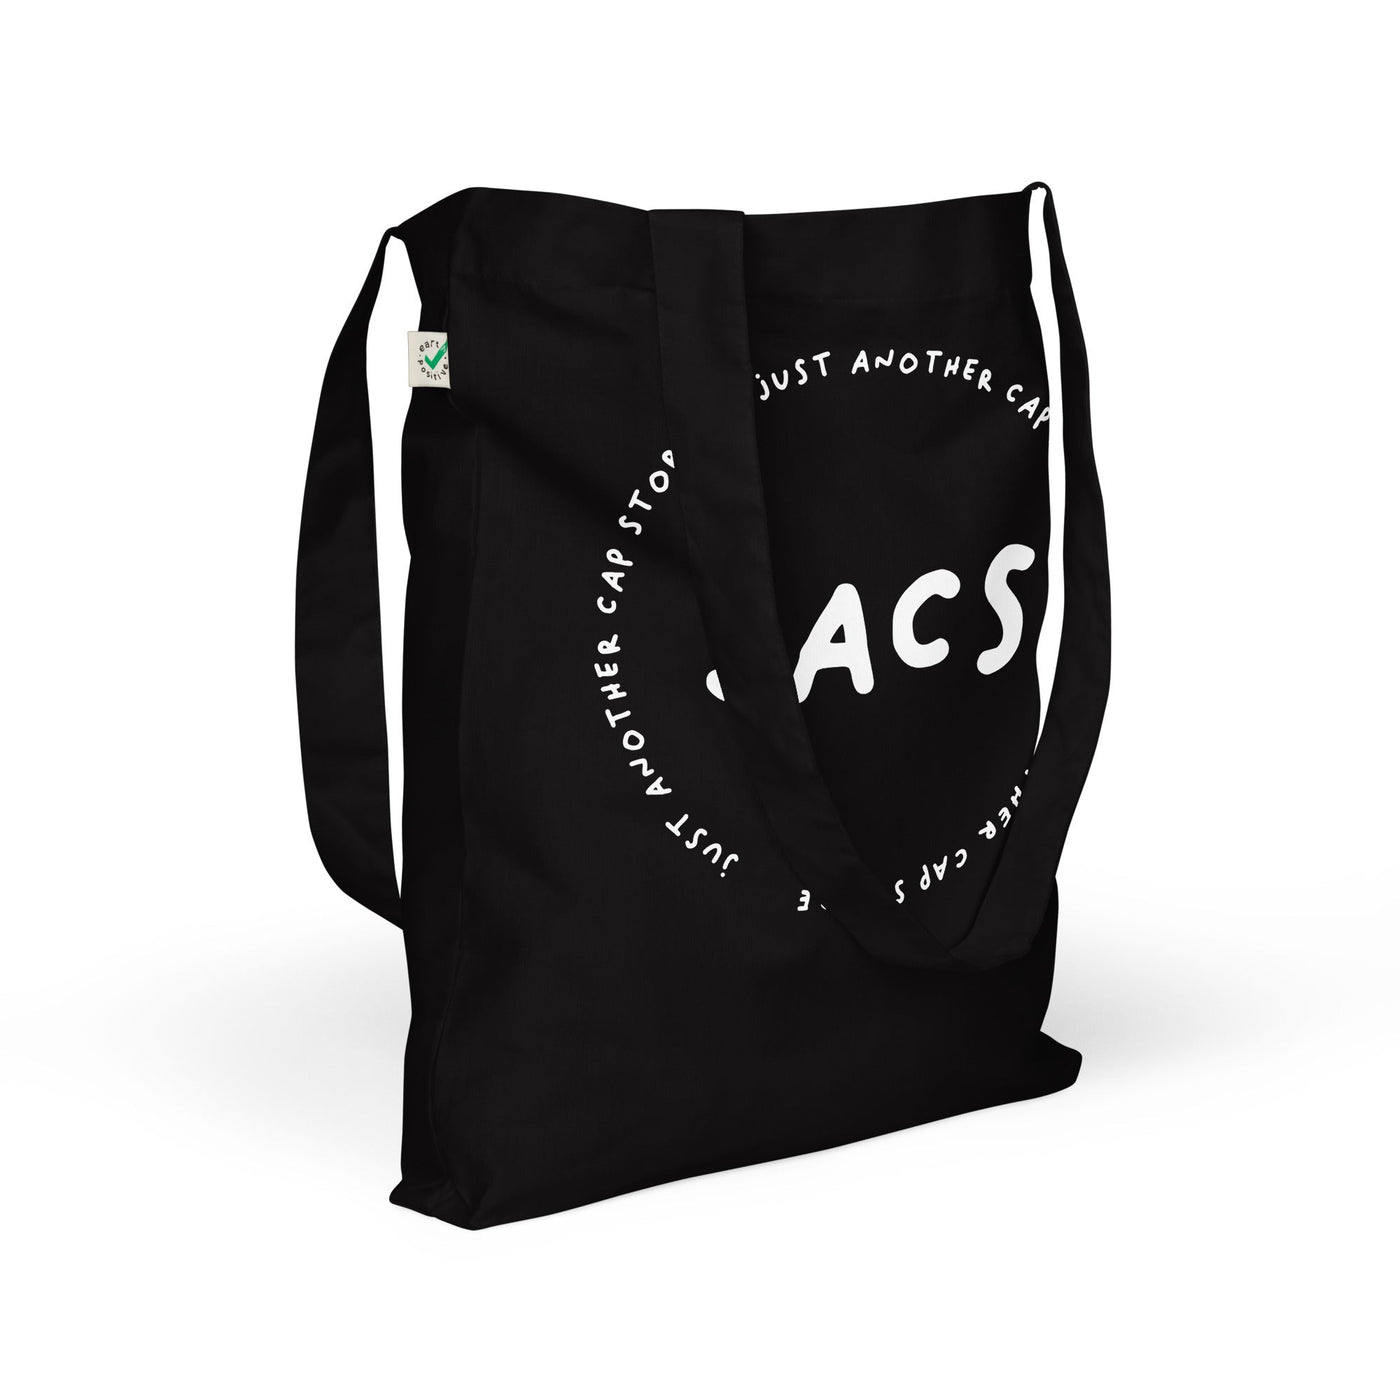 JACS Organic fashion tote bag - Just Another Cap Store